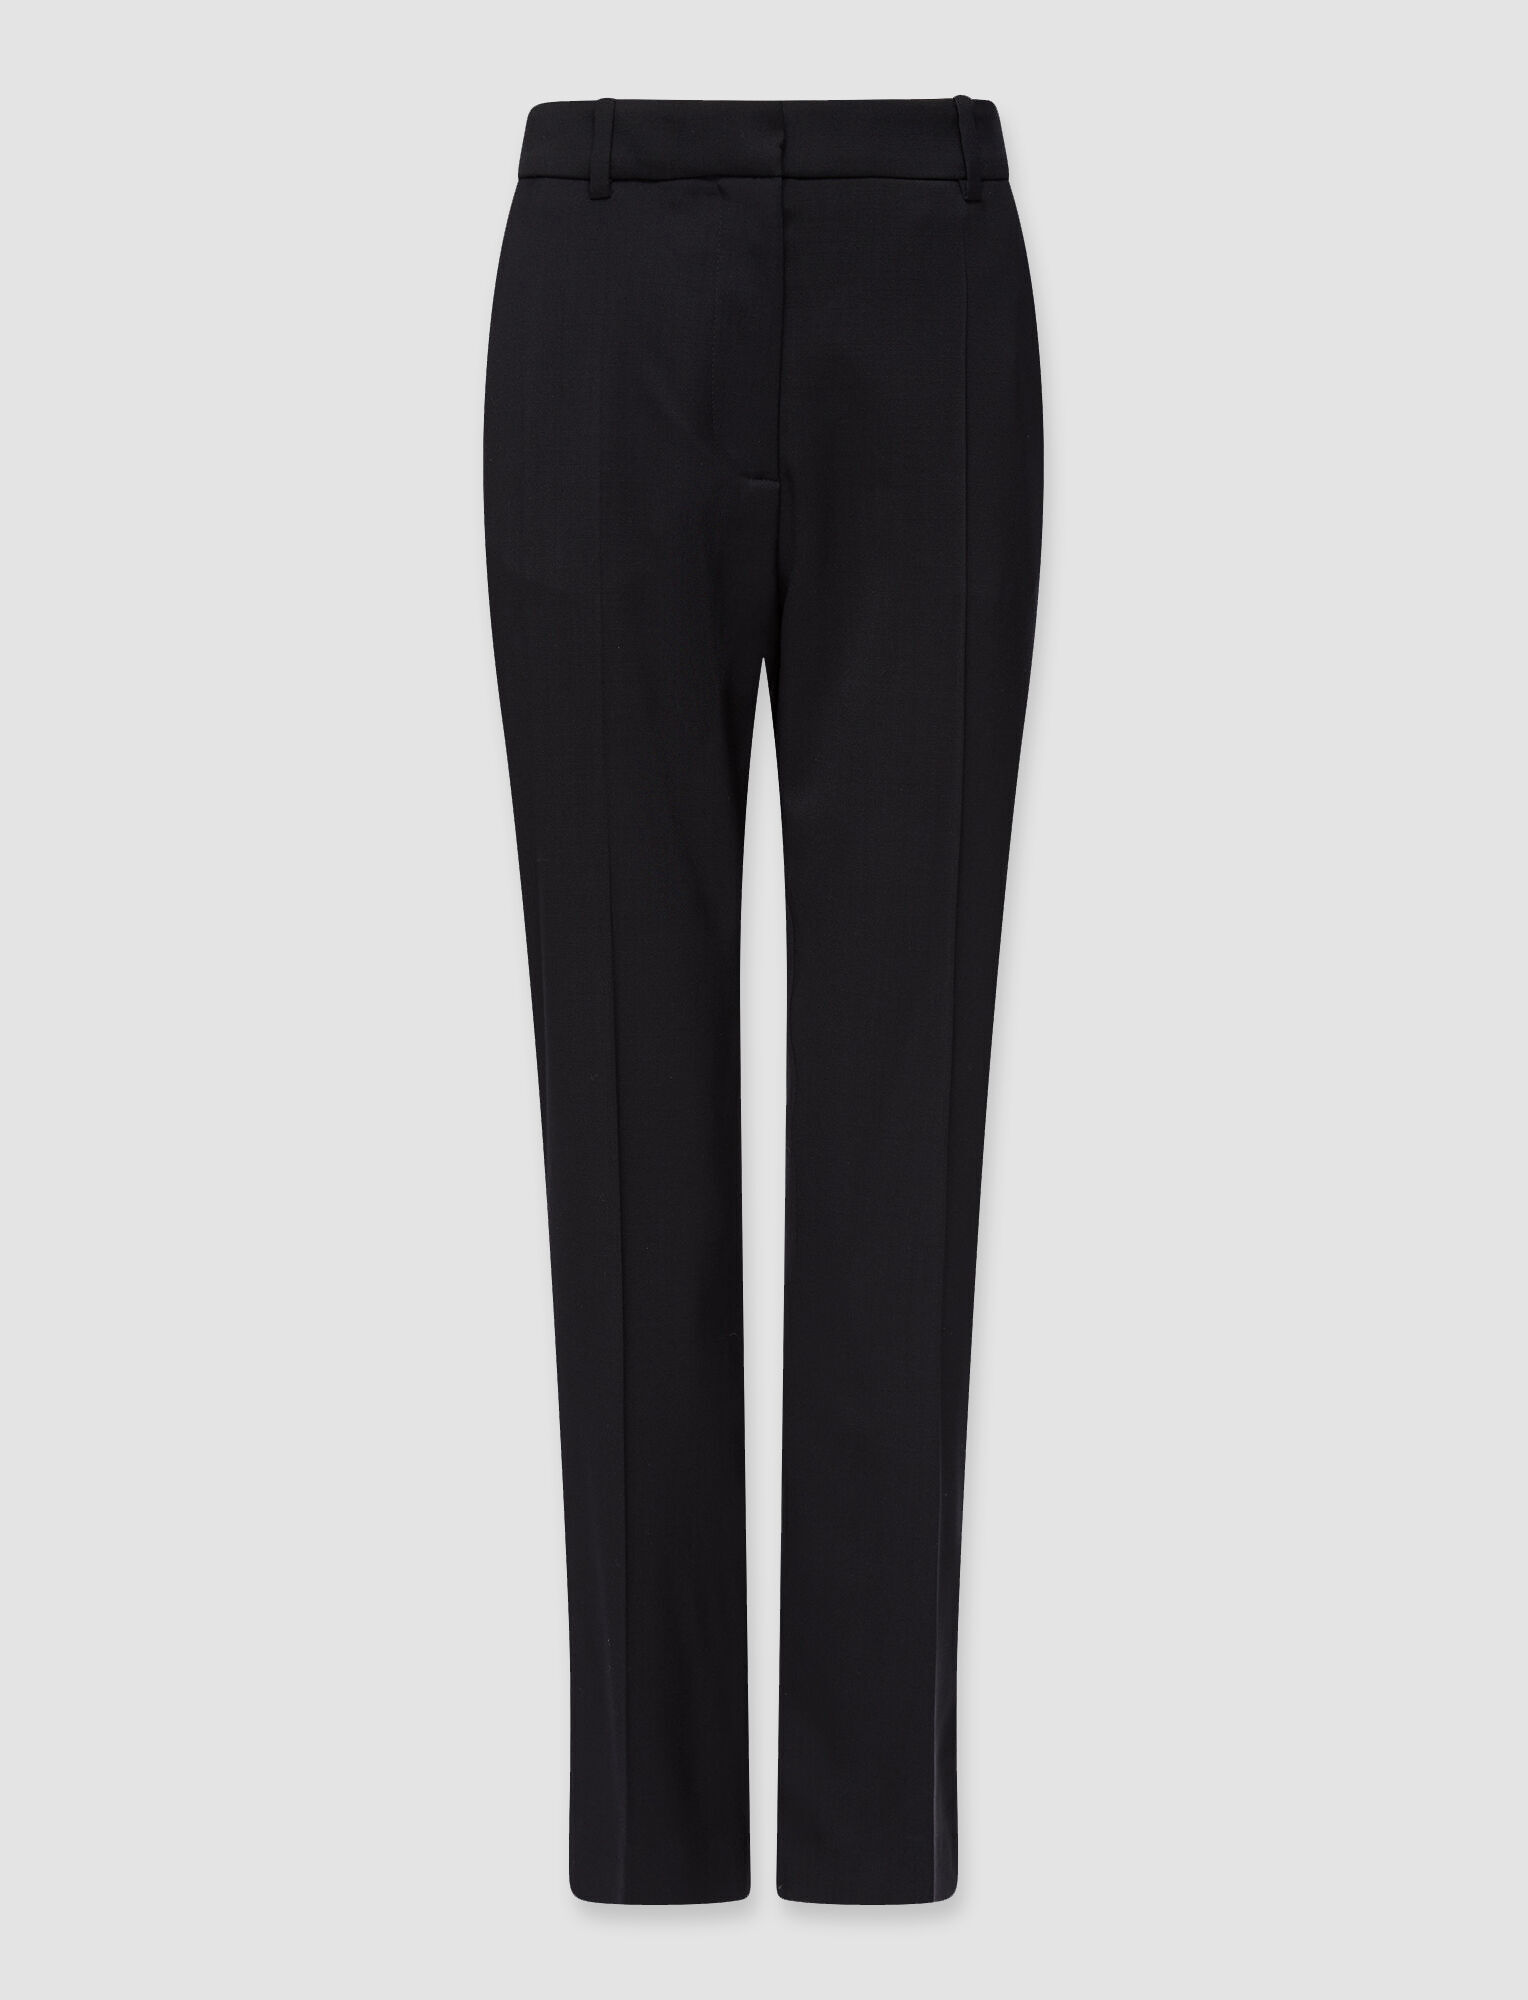 Joseph, Tailor Wool Stretch Coleman Trousers, in 